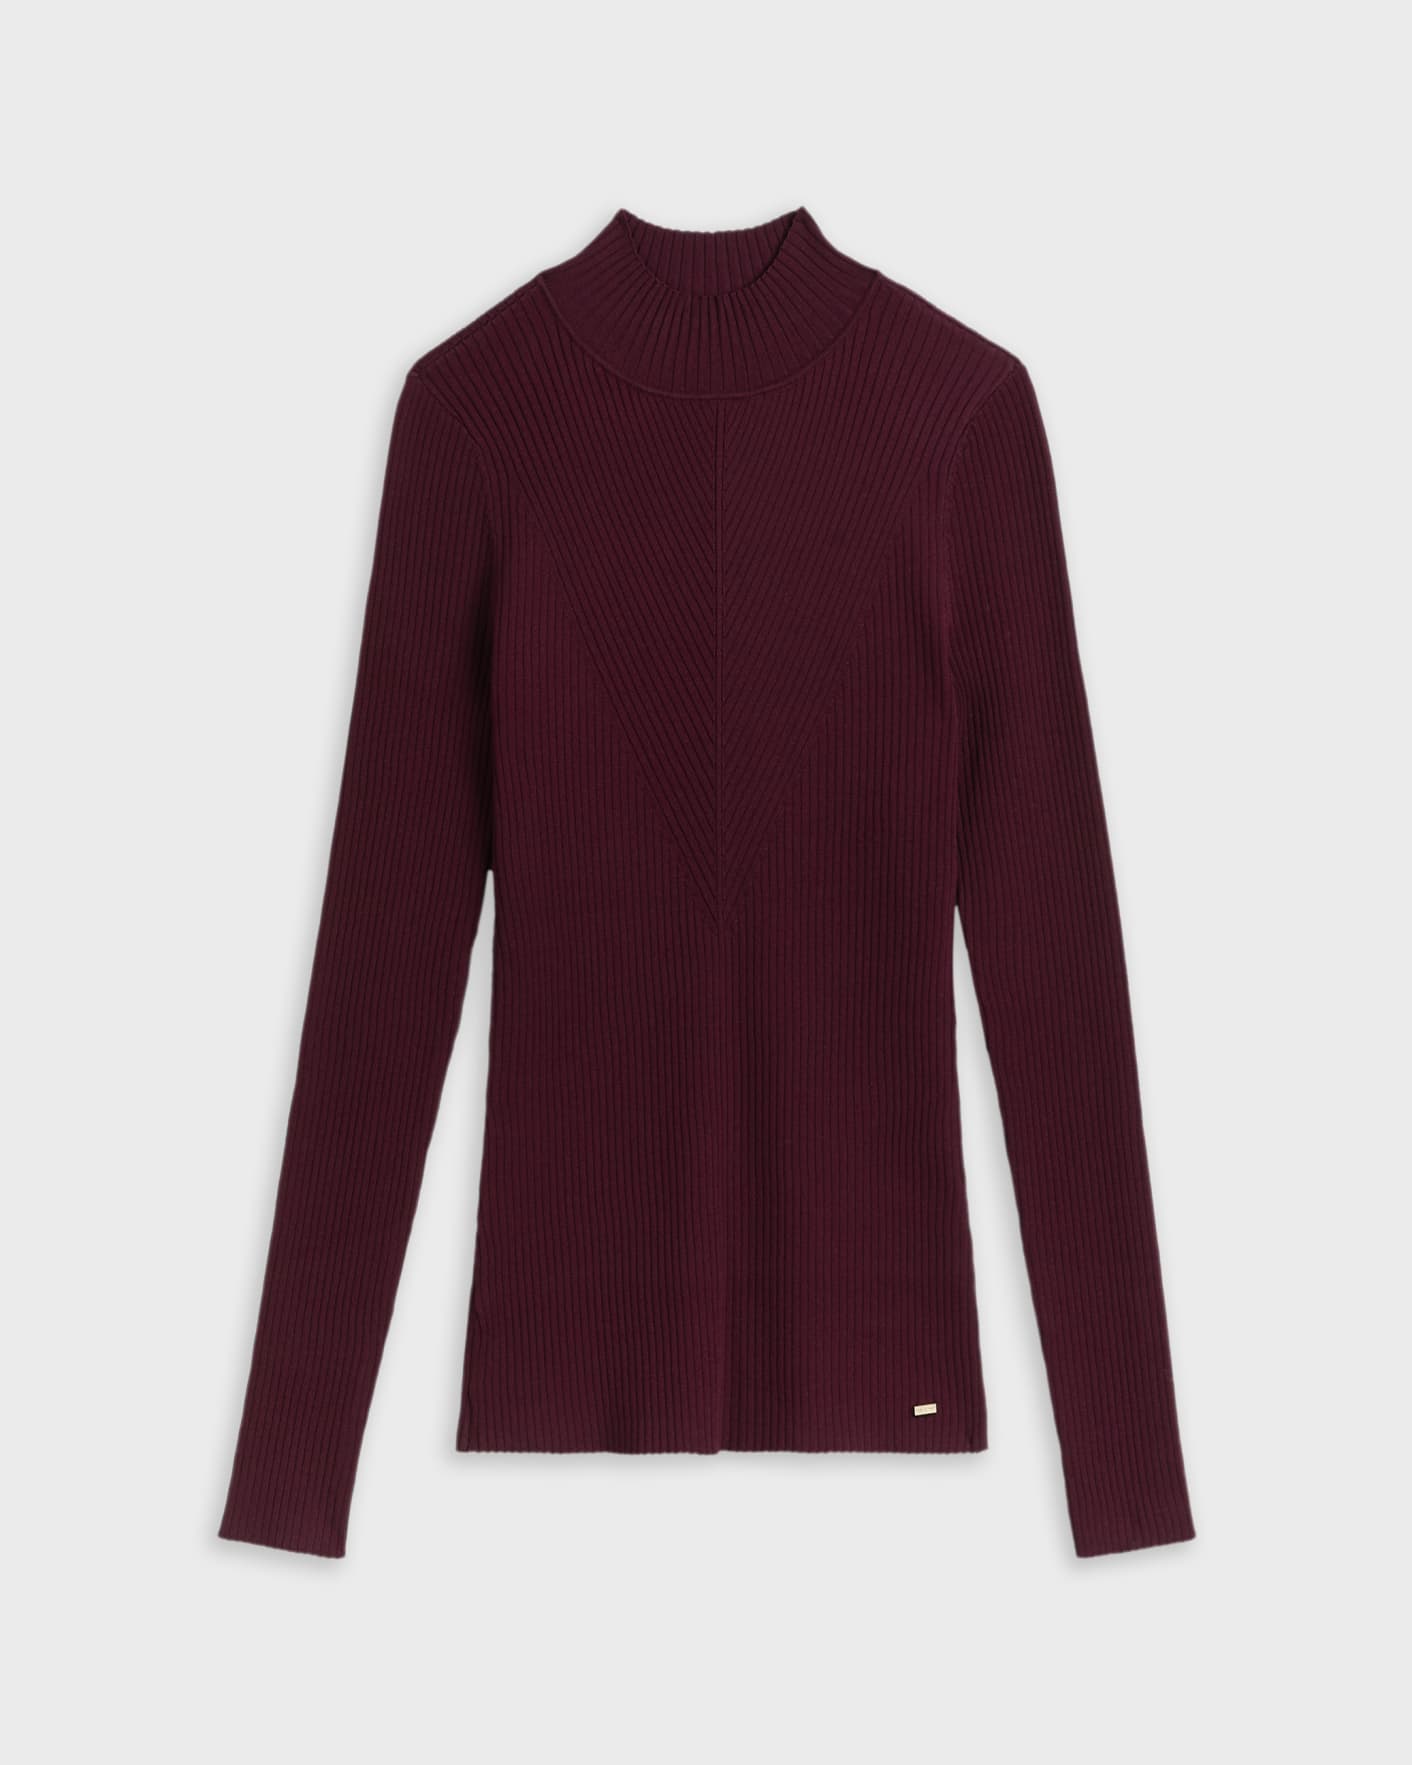 Oxblood High Neck Sweater Ted Baker